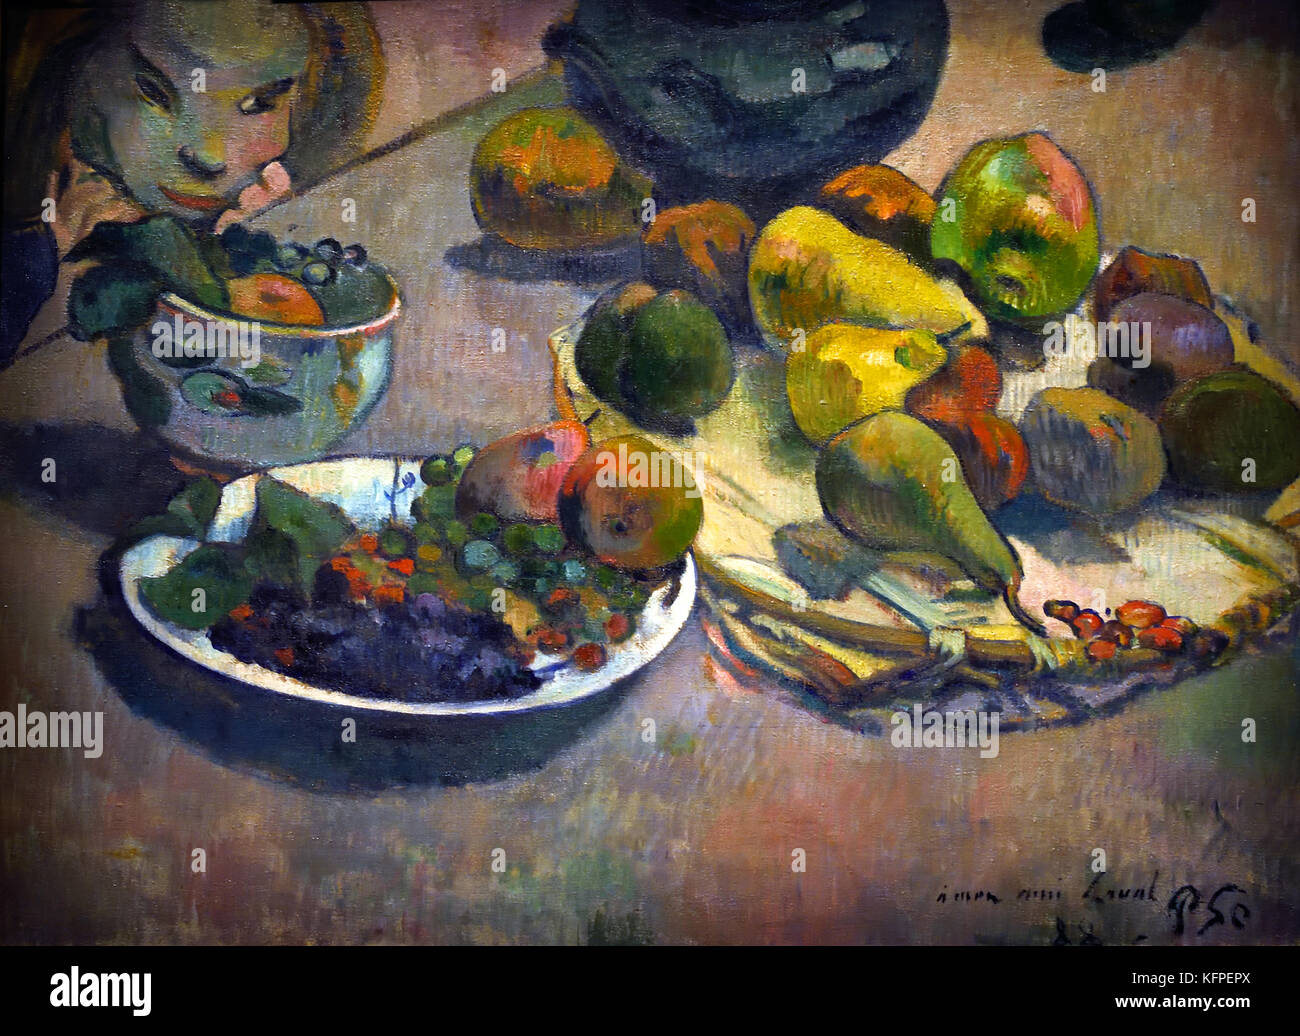 Nature Morte aux Fruit - Still Life with Fruit 1888 Paul Gauguin - Eugène Henri Paul Gauguin 1848 – 1903 was a French post-Impressionist artist, France. ( Died ,8 May 1903, Atuona, Marquesas Islands, French Polynesia ) Painter, Sculptor. Stock Photo